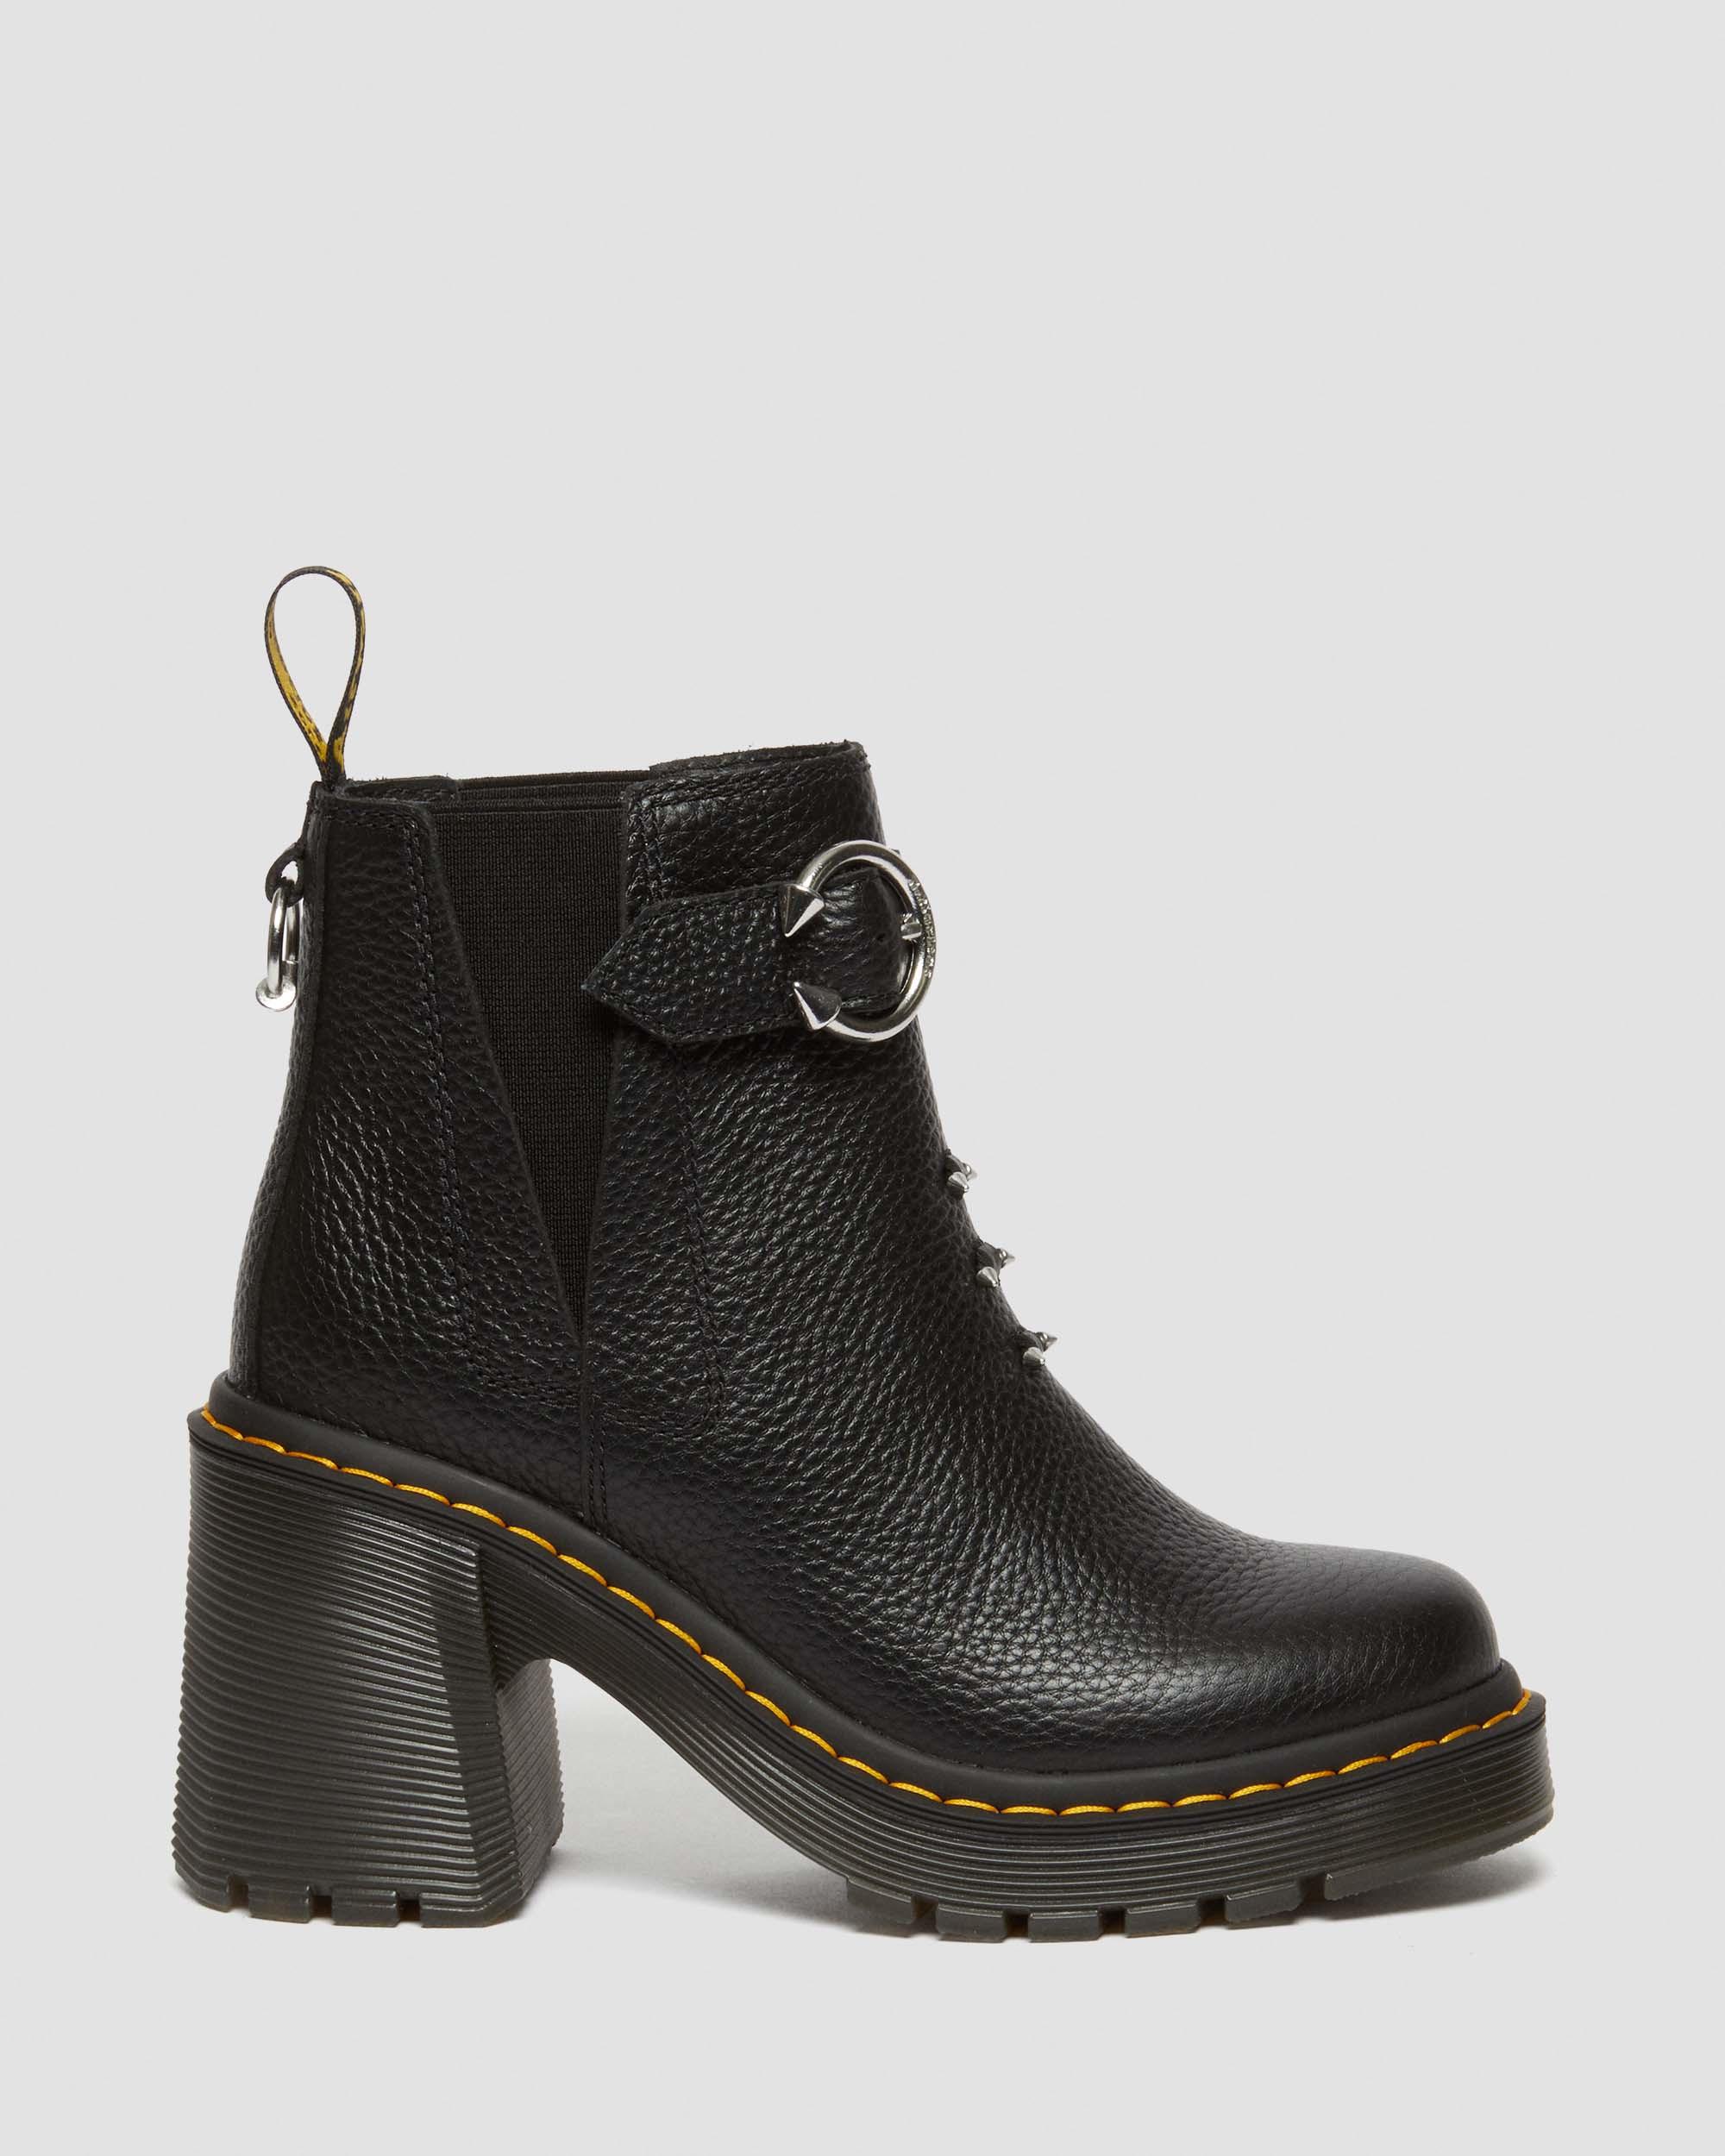 Spence Piercing Leather Flared Heel Chelsea Boots in Black | Dr. Martens